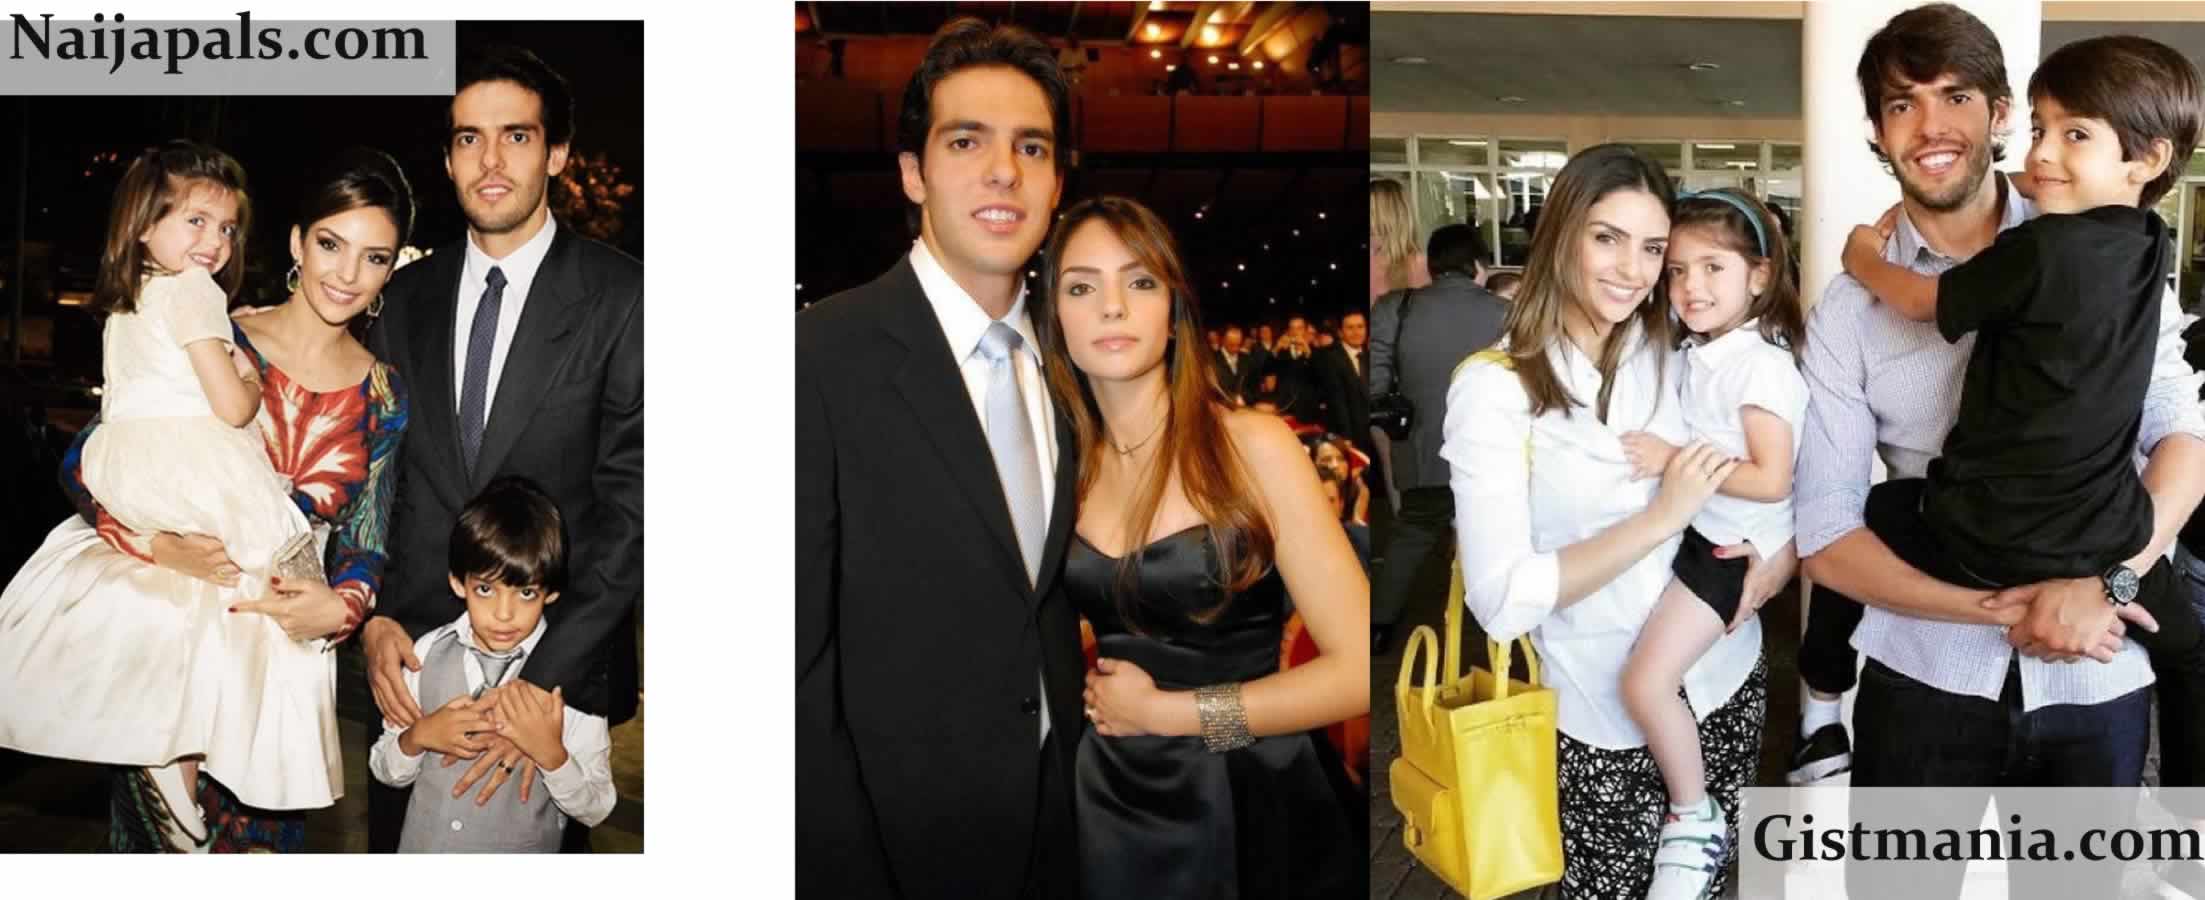 She Didn’t Want To Be Married Anymore – Footballer, Kaka Speaks On Why Ex-Wife Divorced Him